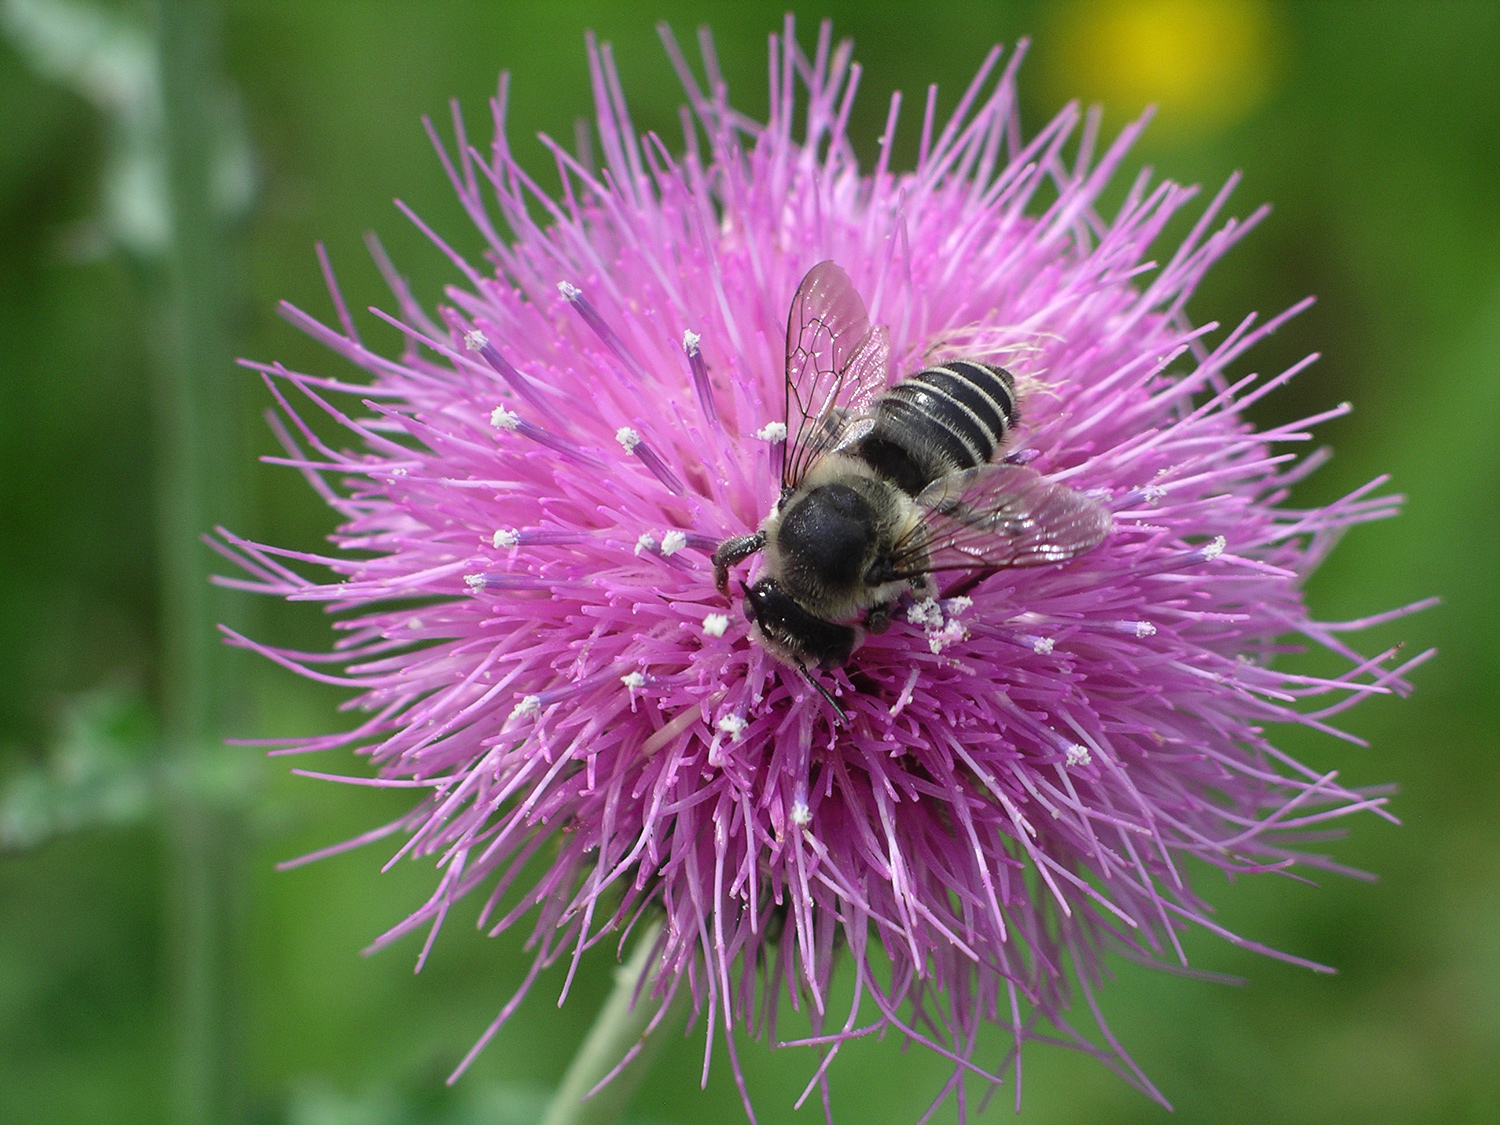 Leafcutter bee on a magenta flower